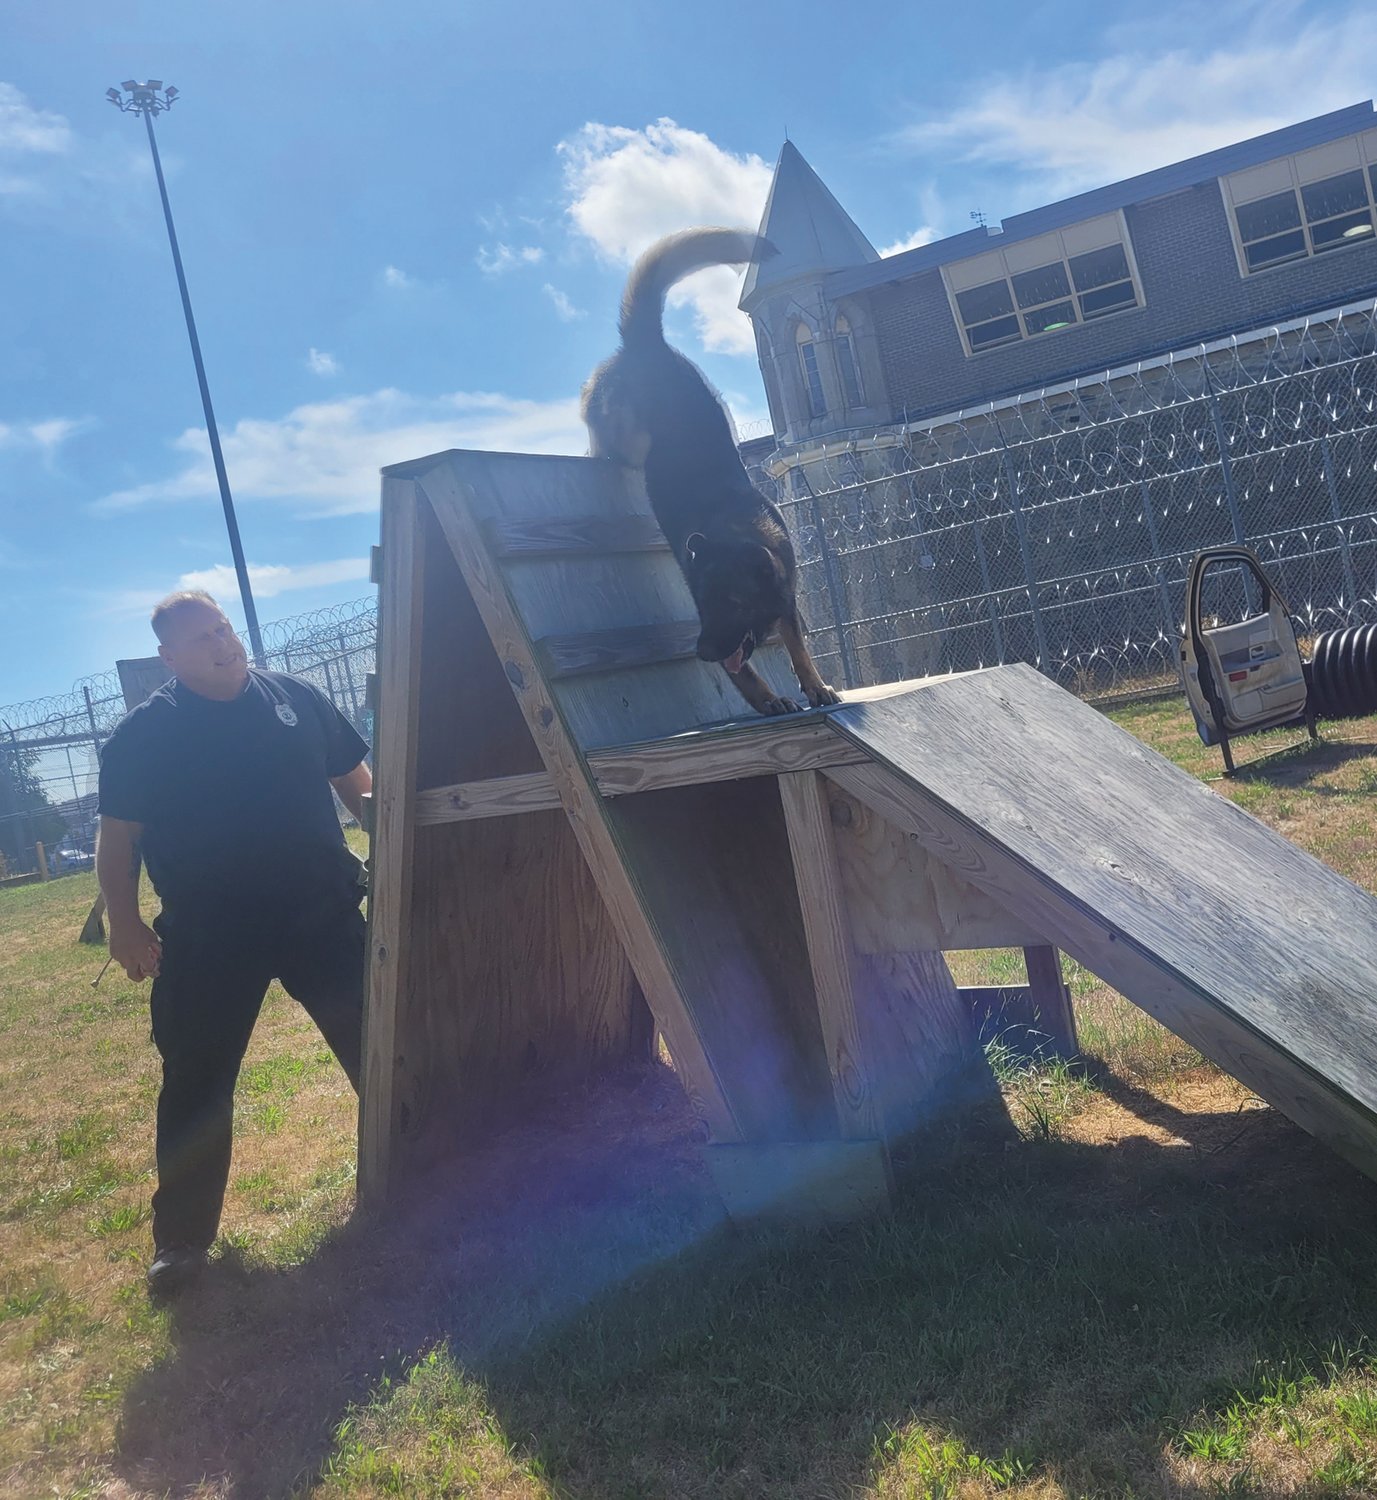 NO MOUNTAIN TOO HIGH: After a couple unsuccessful tries, K-9 Taz reaches the summit of a wooden obstacle on the police training course in the shadow of the maximum security prison in Cranston.